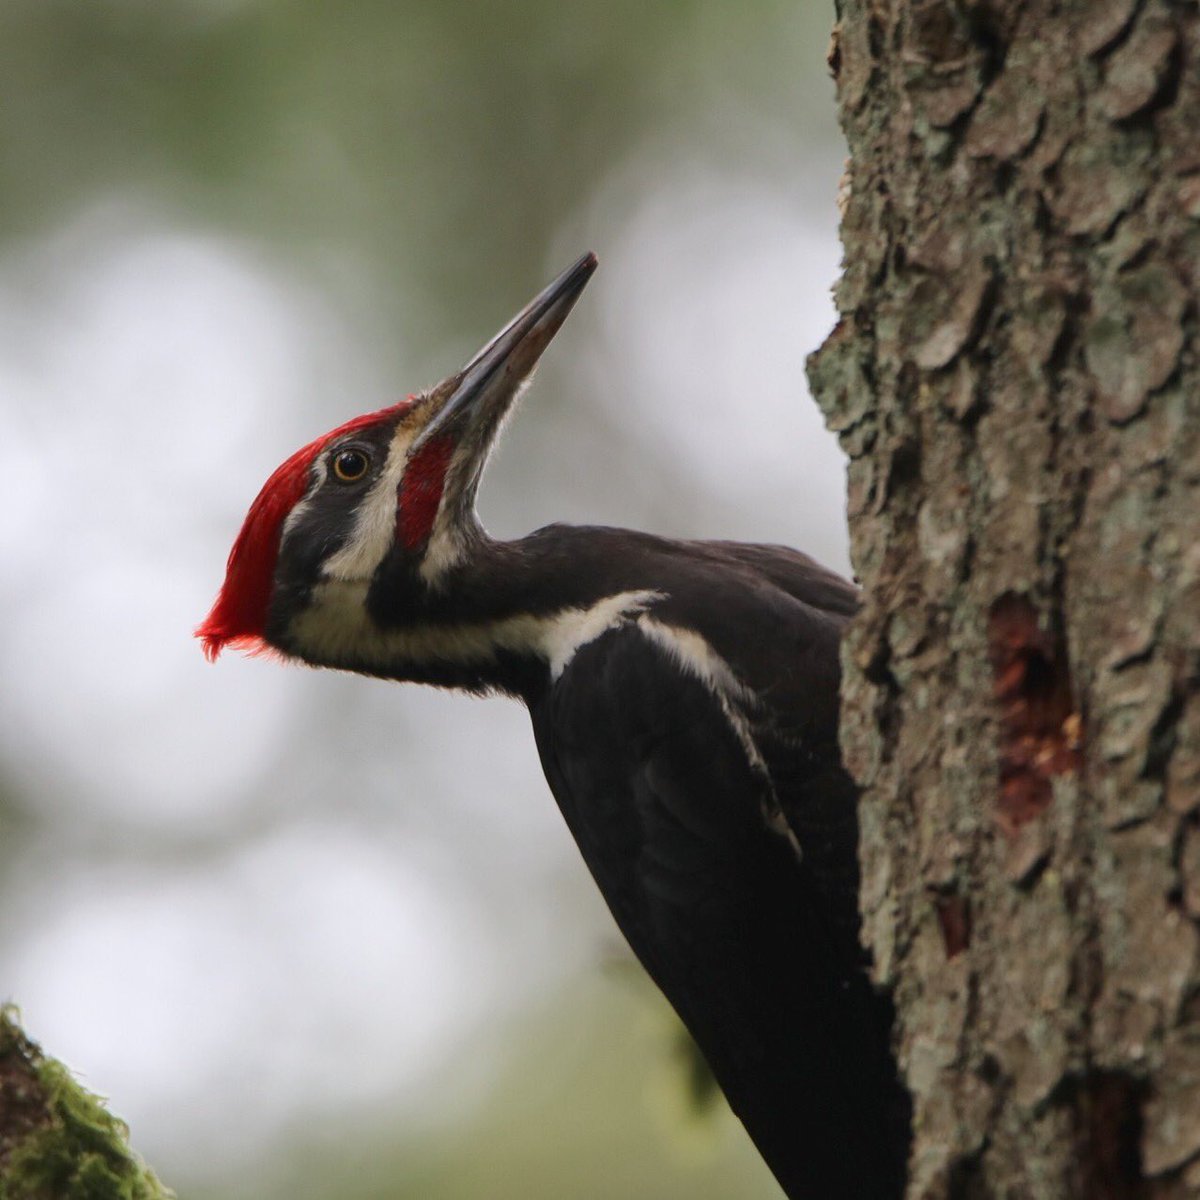 King of the forest. Pileated Woodpeckers sure are stunning! ❤️#birding #birds #woodpeckers #kingoftheforest #birdsoforegon